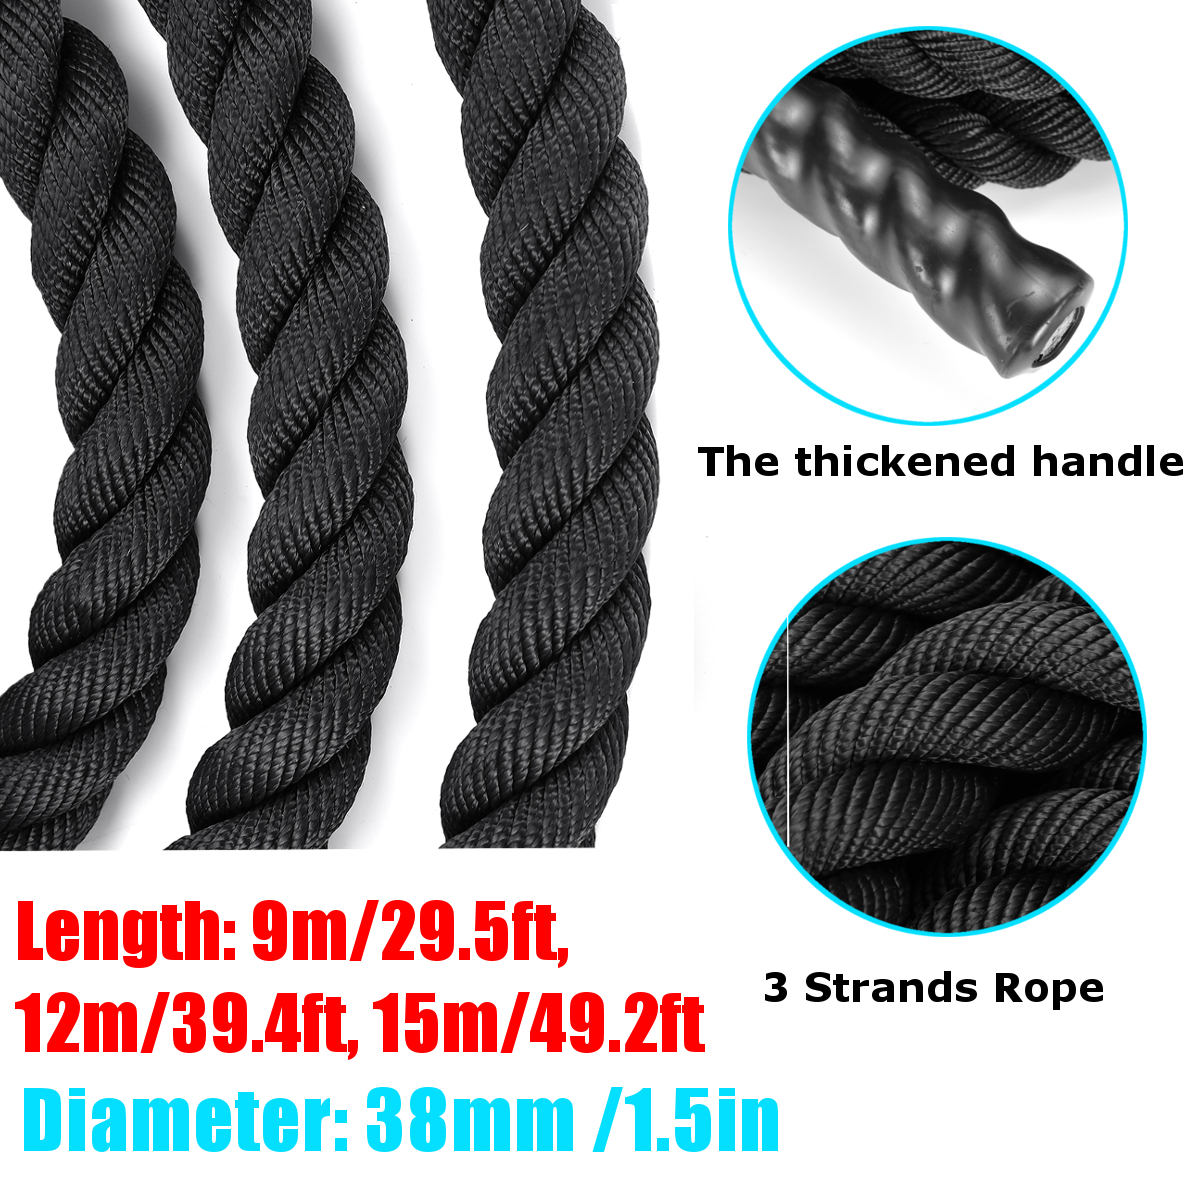 91215m-Battle-Rope-Strength-Training-Undulation-Rope-Exercise-Tools-Home-Gym-Fitness-Equipment-1858044-2